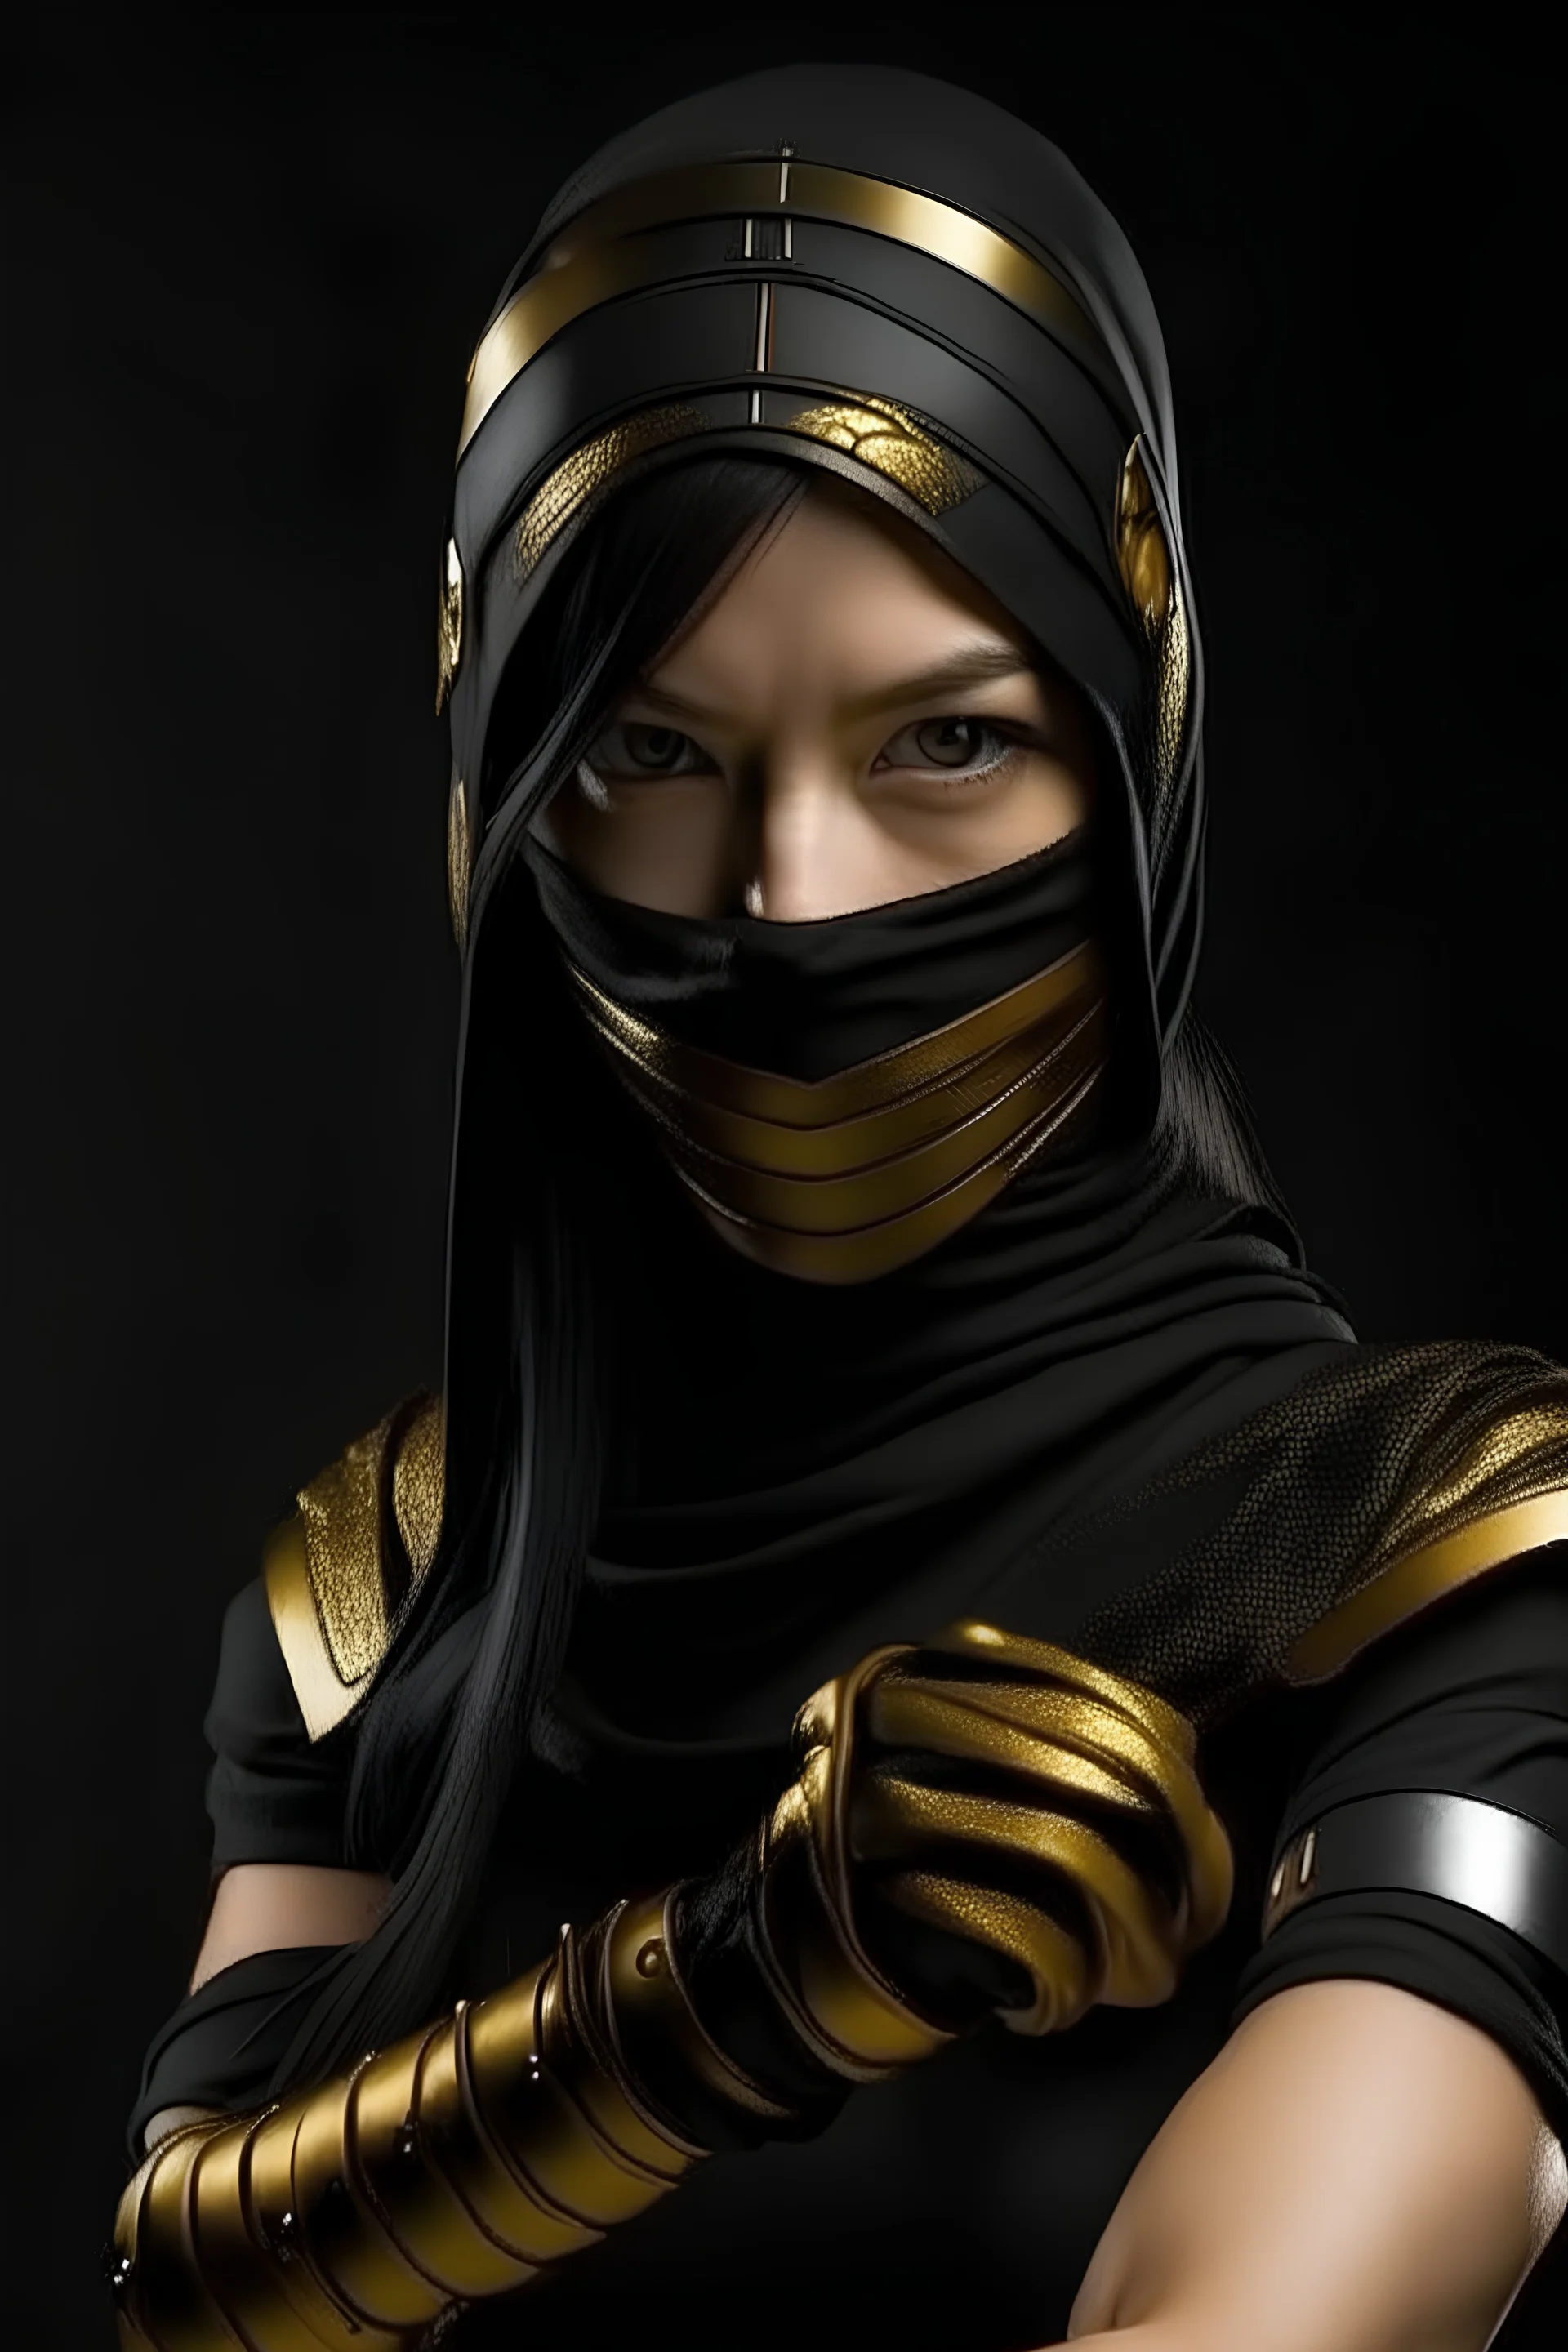 A sexy ninja female with black and gold outfit